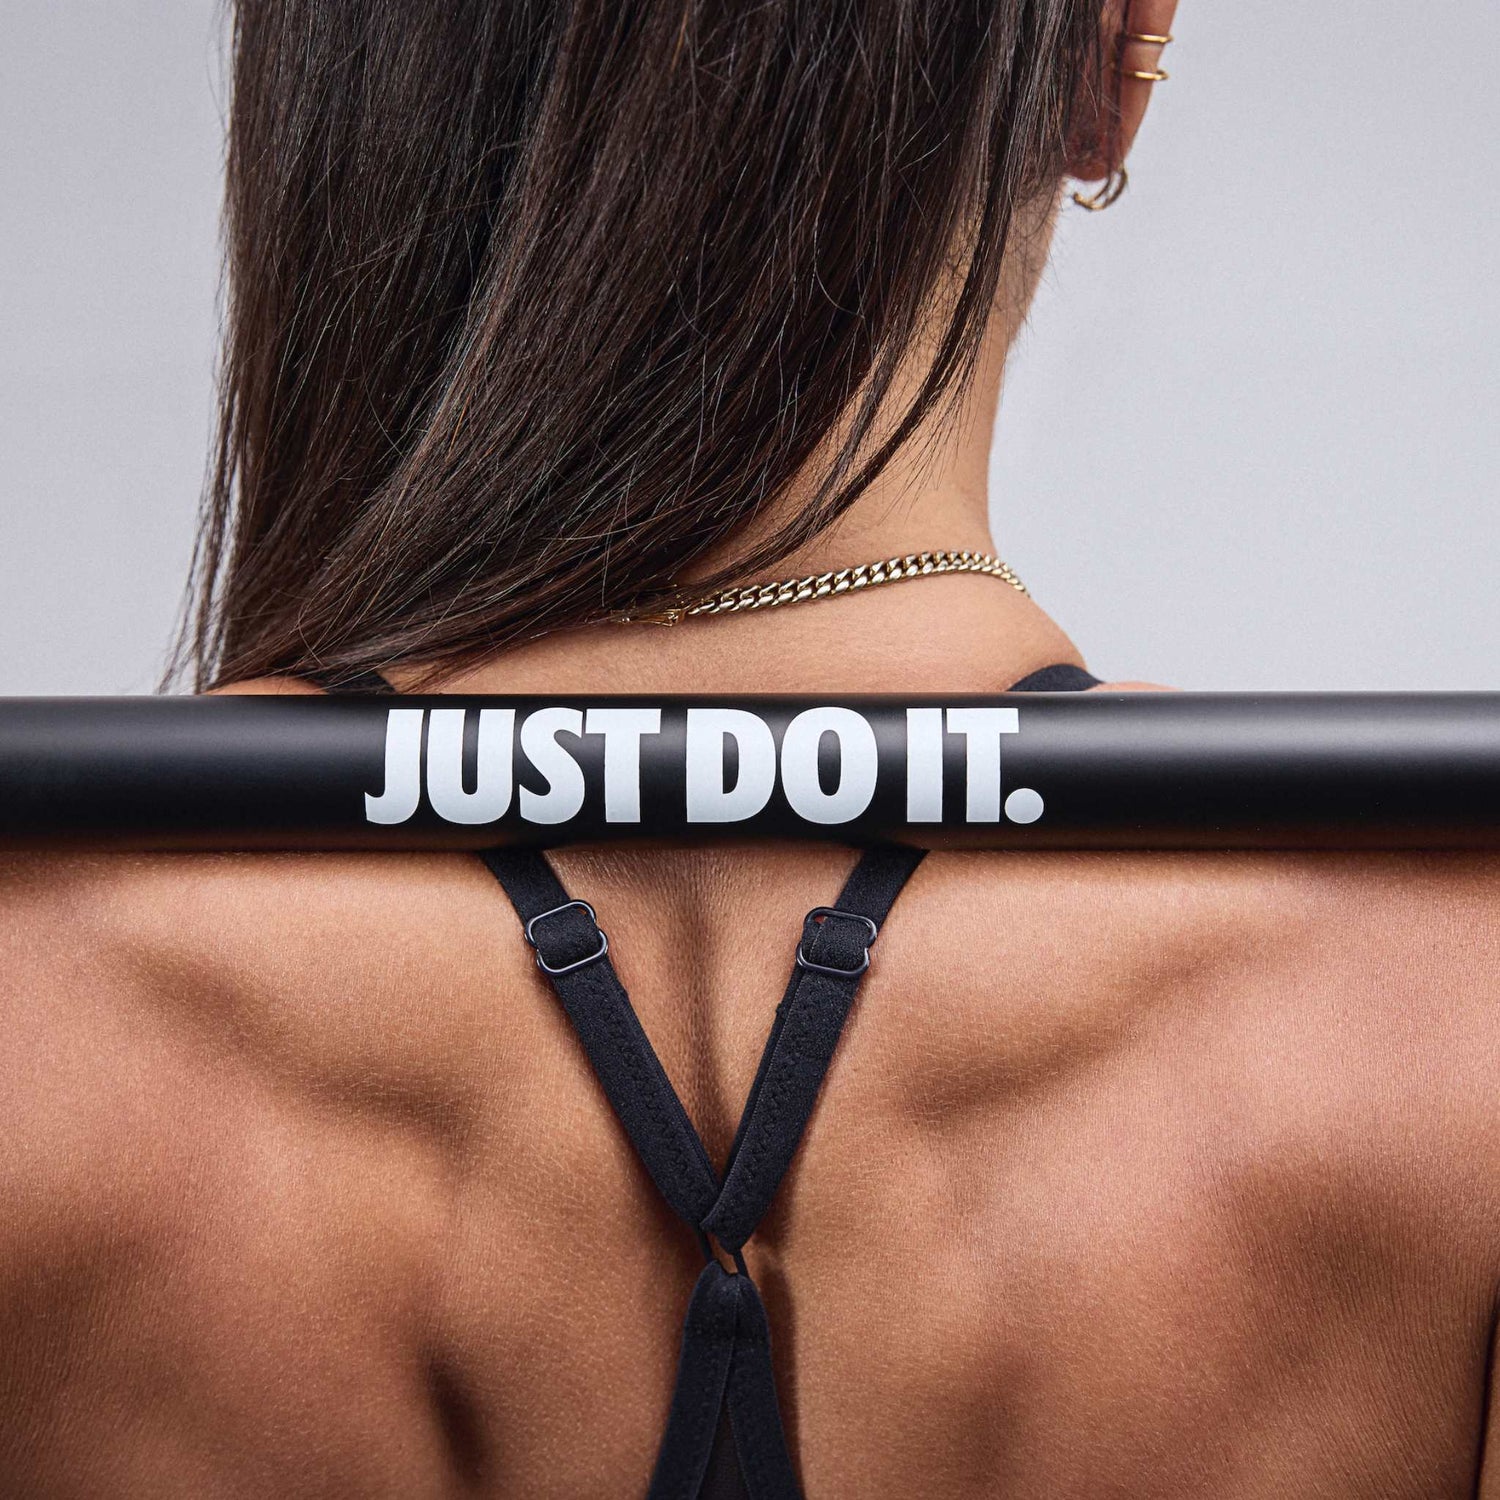 Nike coated premium barbell 15kg Just Do It logo featured clearly on female athlete's back